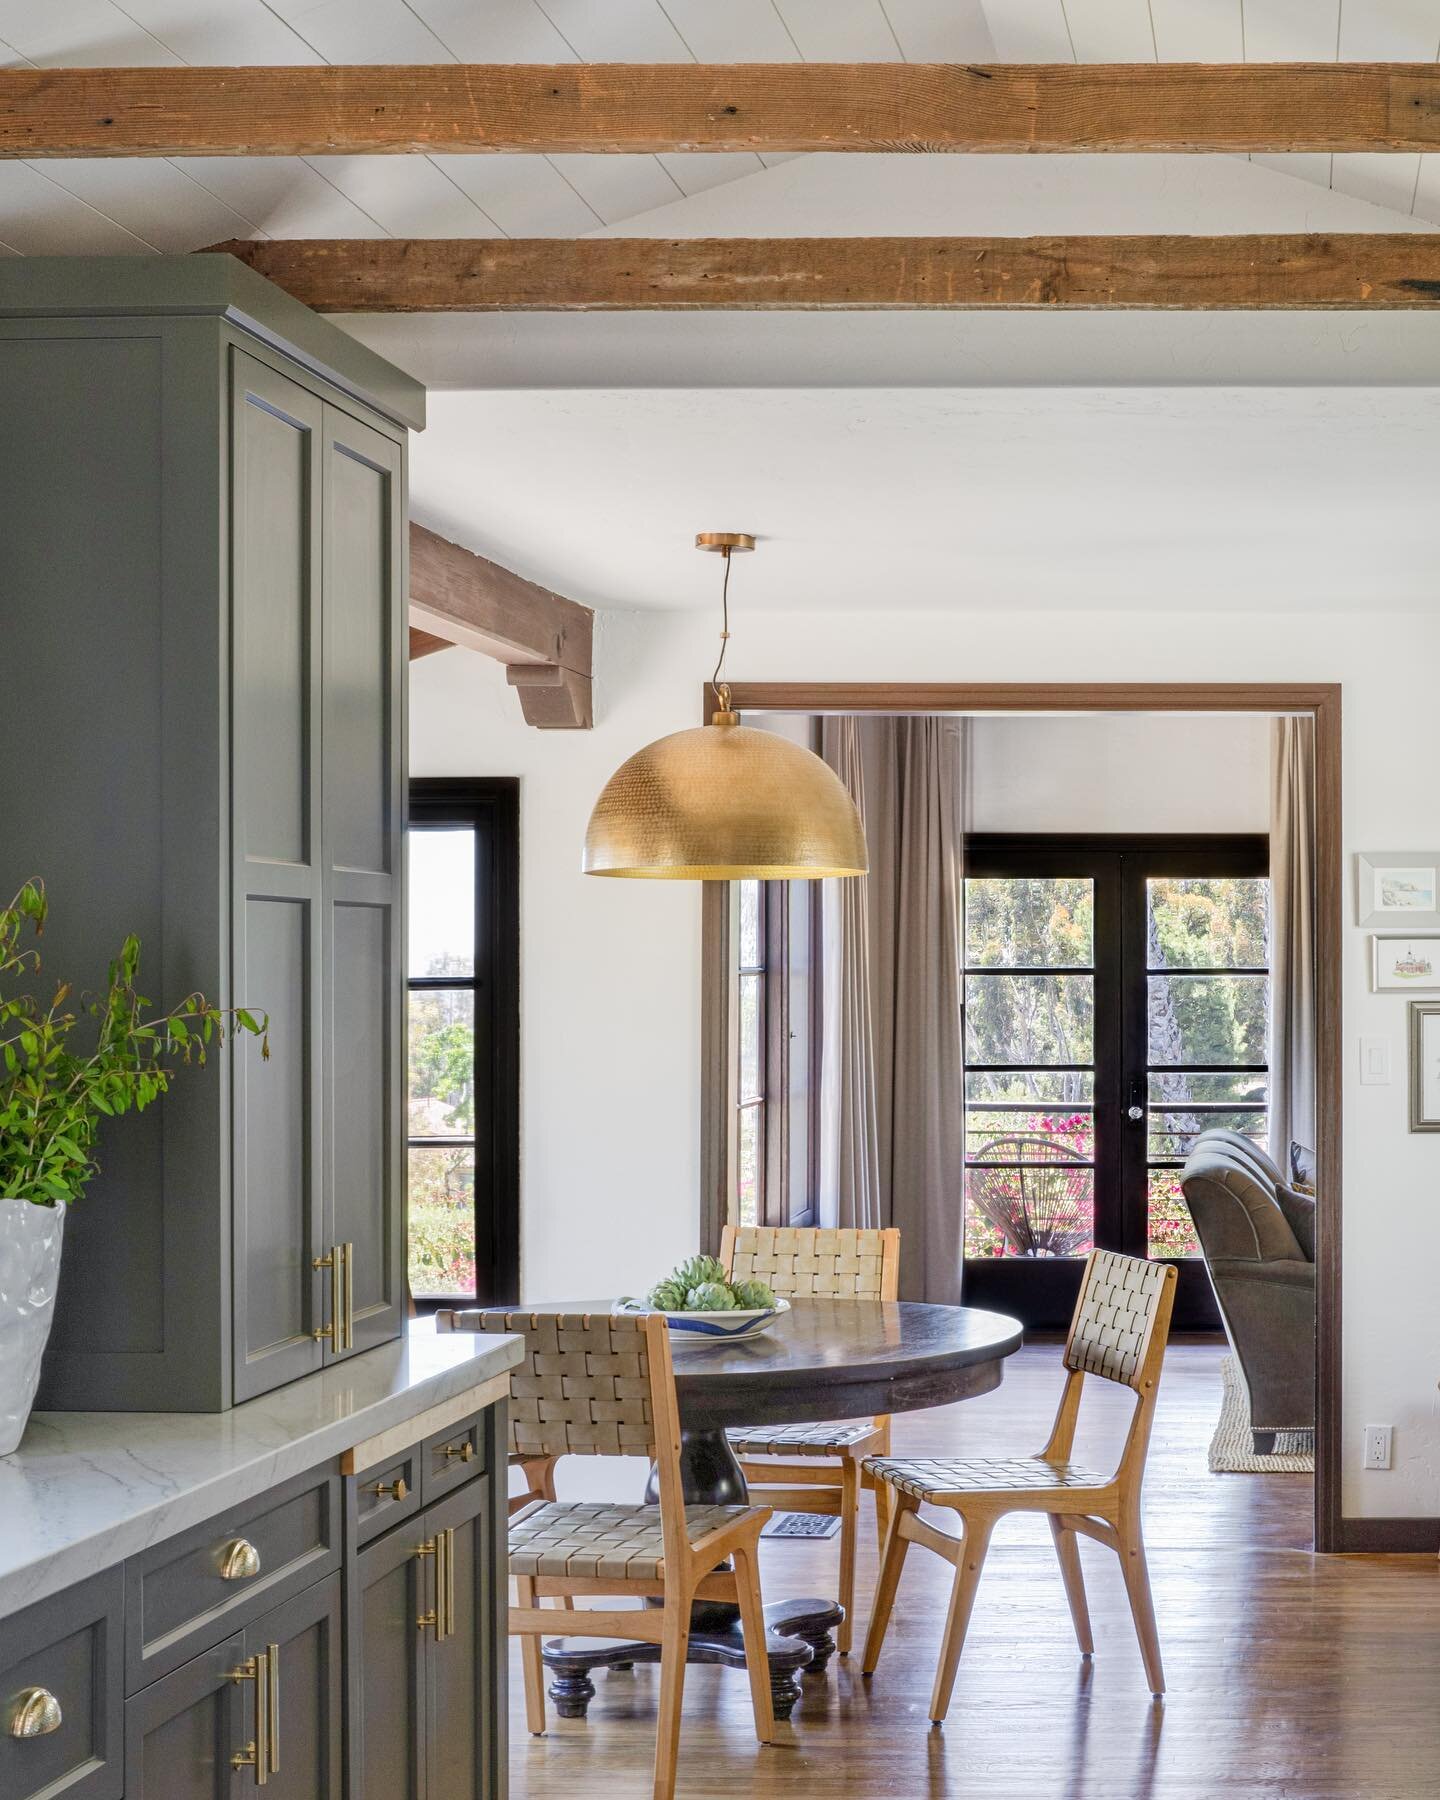 This historic home was updated fully updated, but so many original great elements are still in place. The flooring all original, plaster walls, and these weathered ceiling beams that used to be covered now show so well. #spanishmodern #modernspanish 